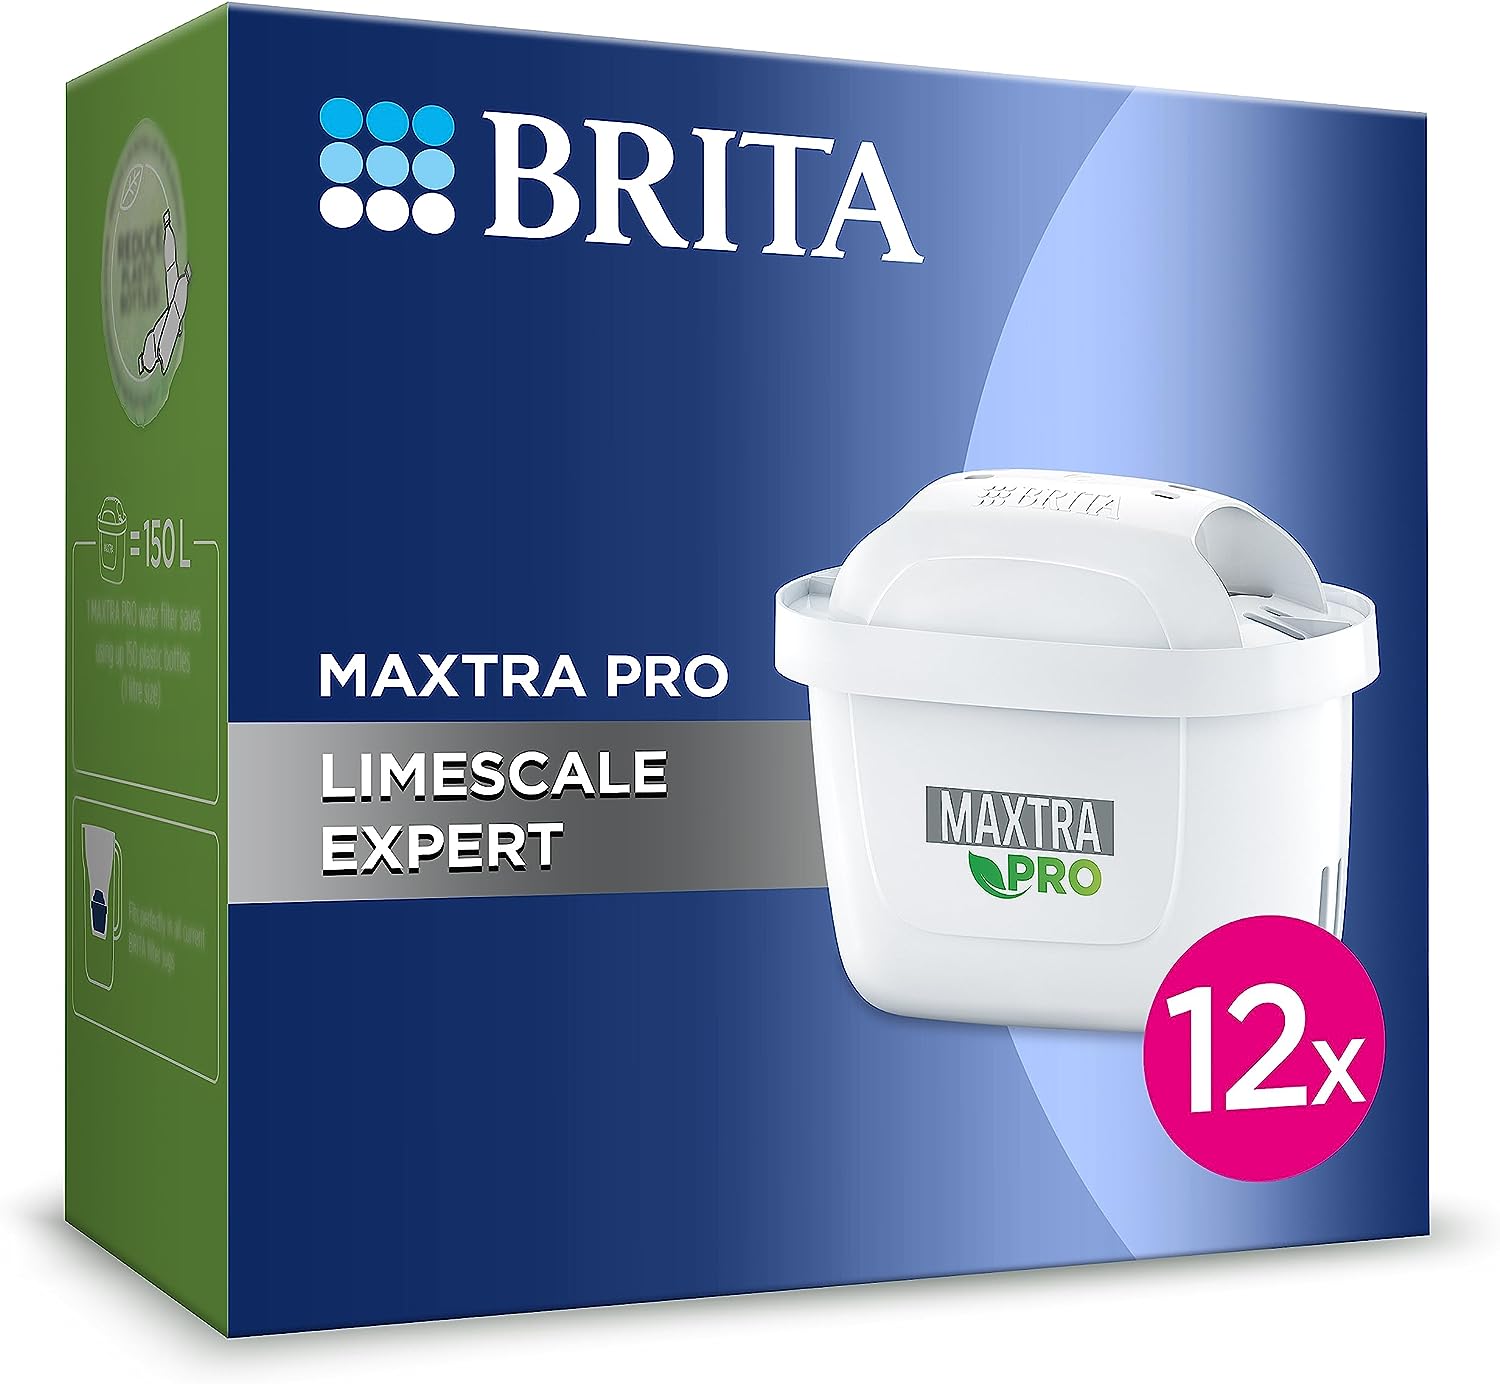 In our warehouse: Brita Maxtra Plus - 4 pack B2B Sales Offer. 